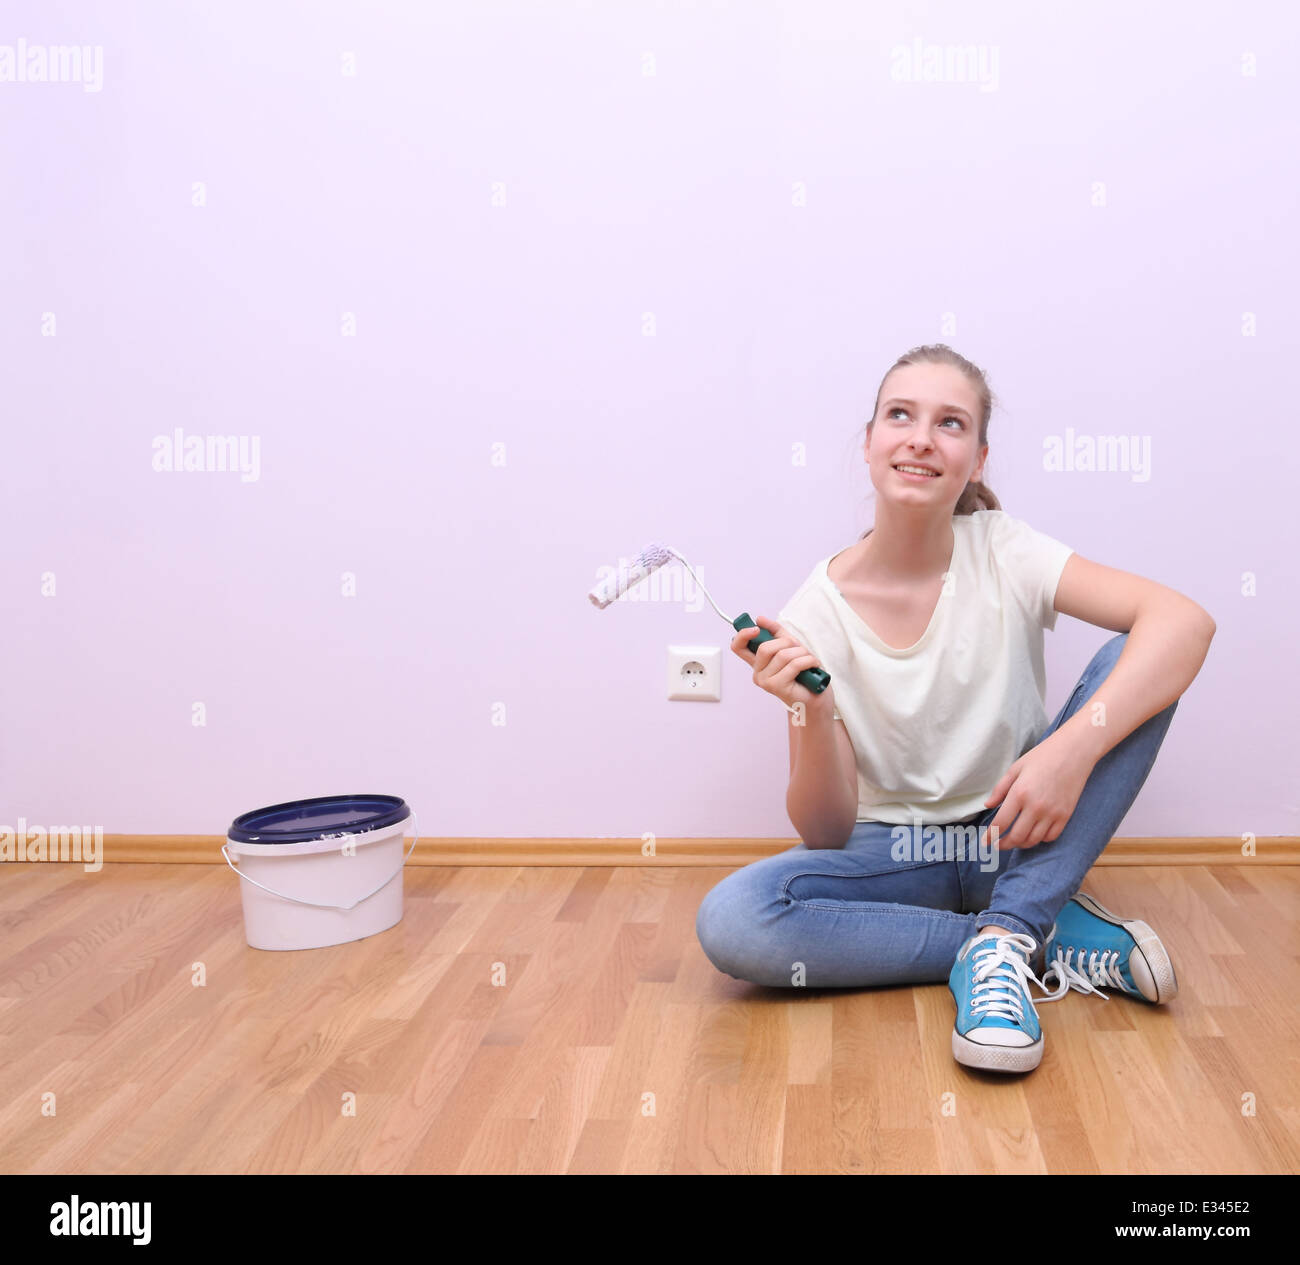 Dreaming girl in house renovation, lilac color, horizontal Stock Photo